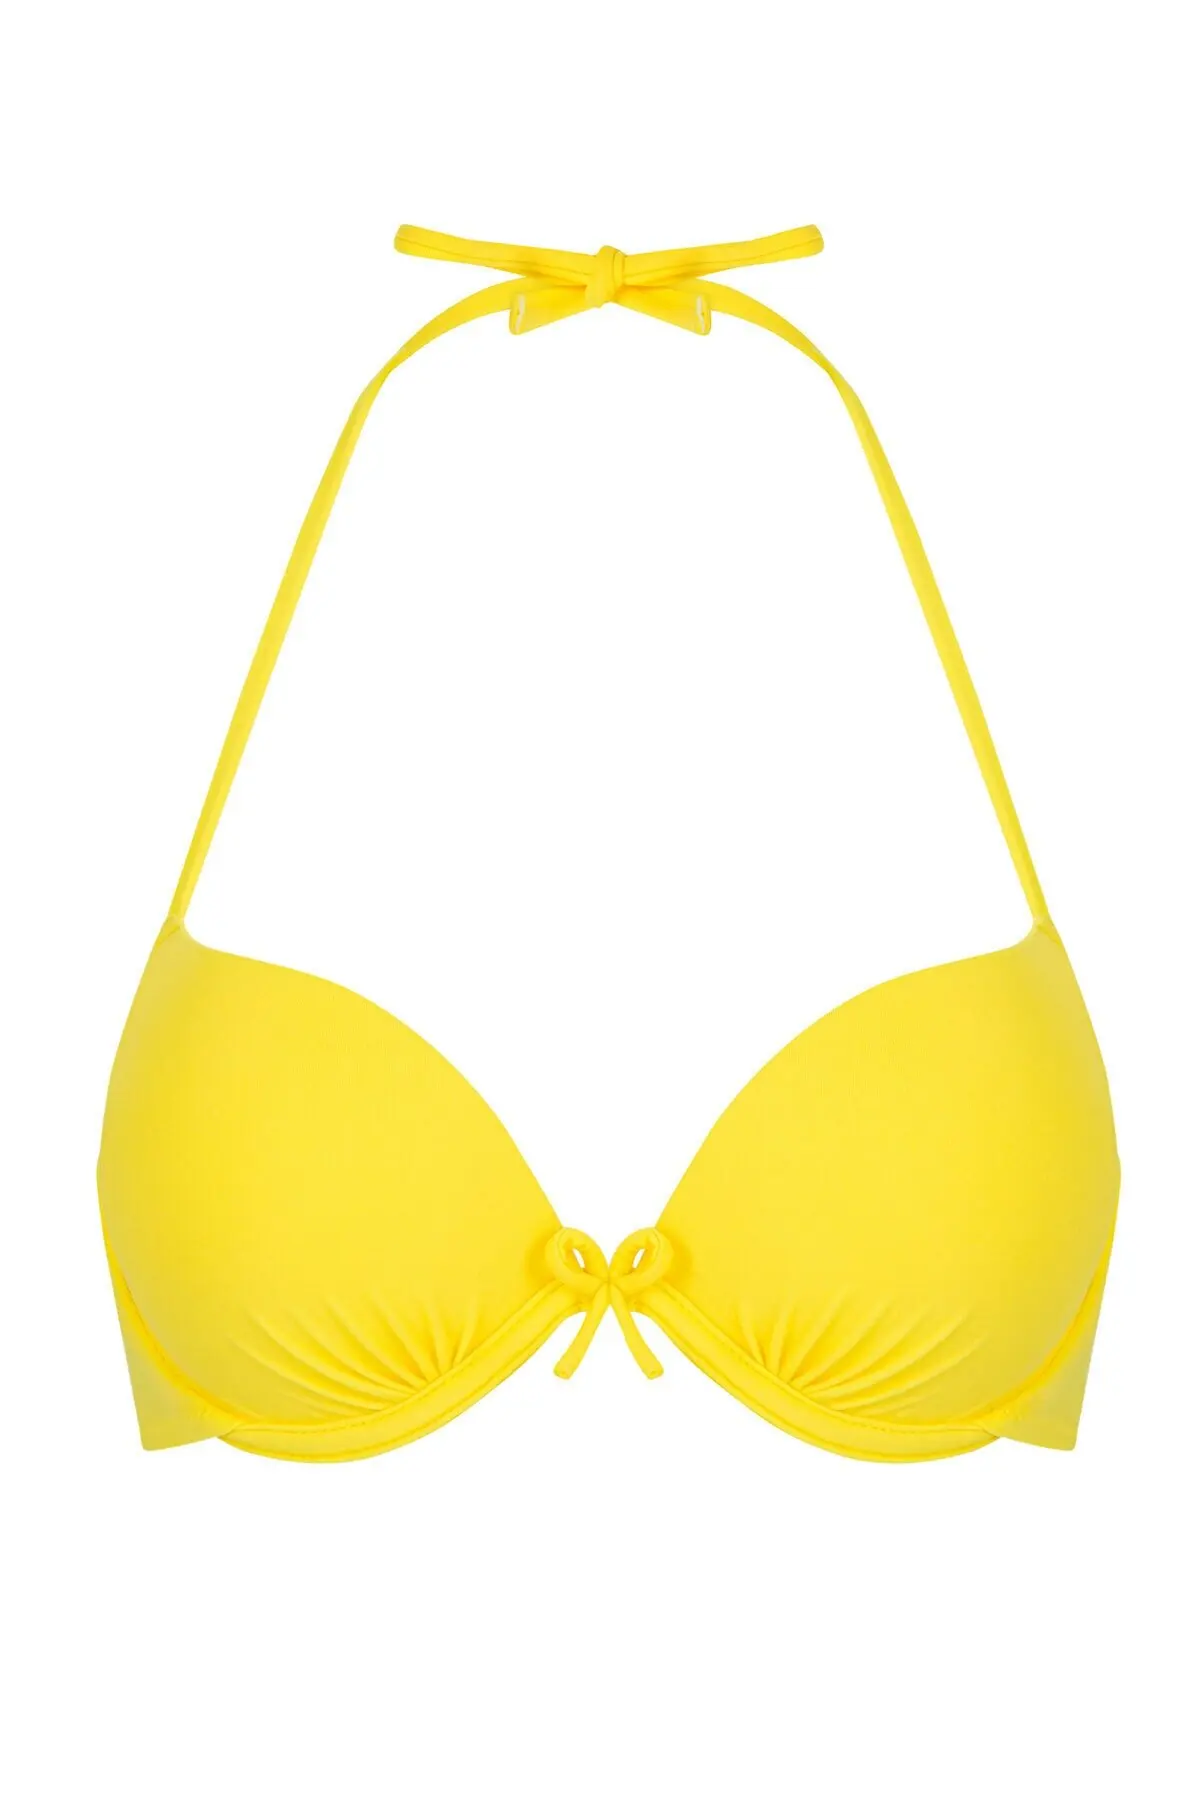 LOOK FOR YOUR WONDERFUL NIGHTS WITH ITS STUNNING Women's Yellow Basic Push Up Bikini Top FREE  SHIPPING